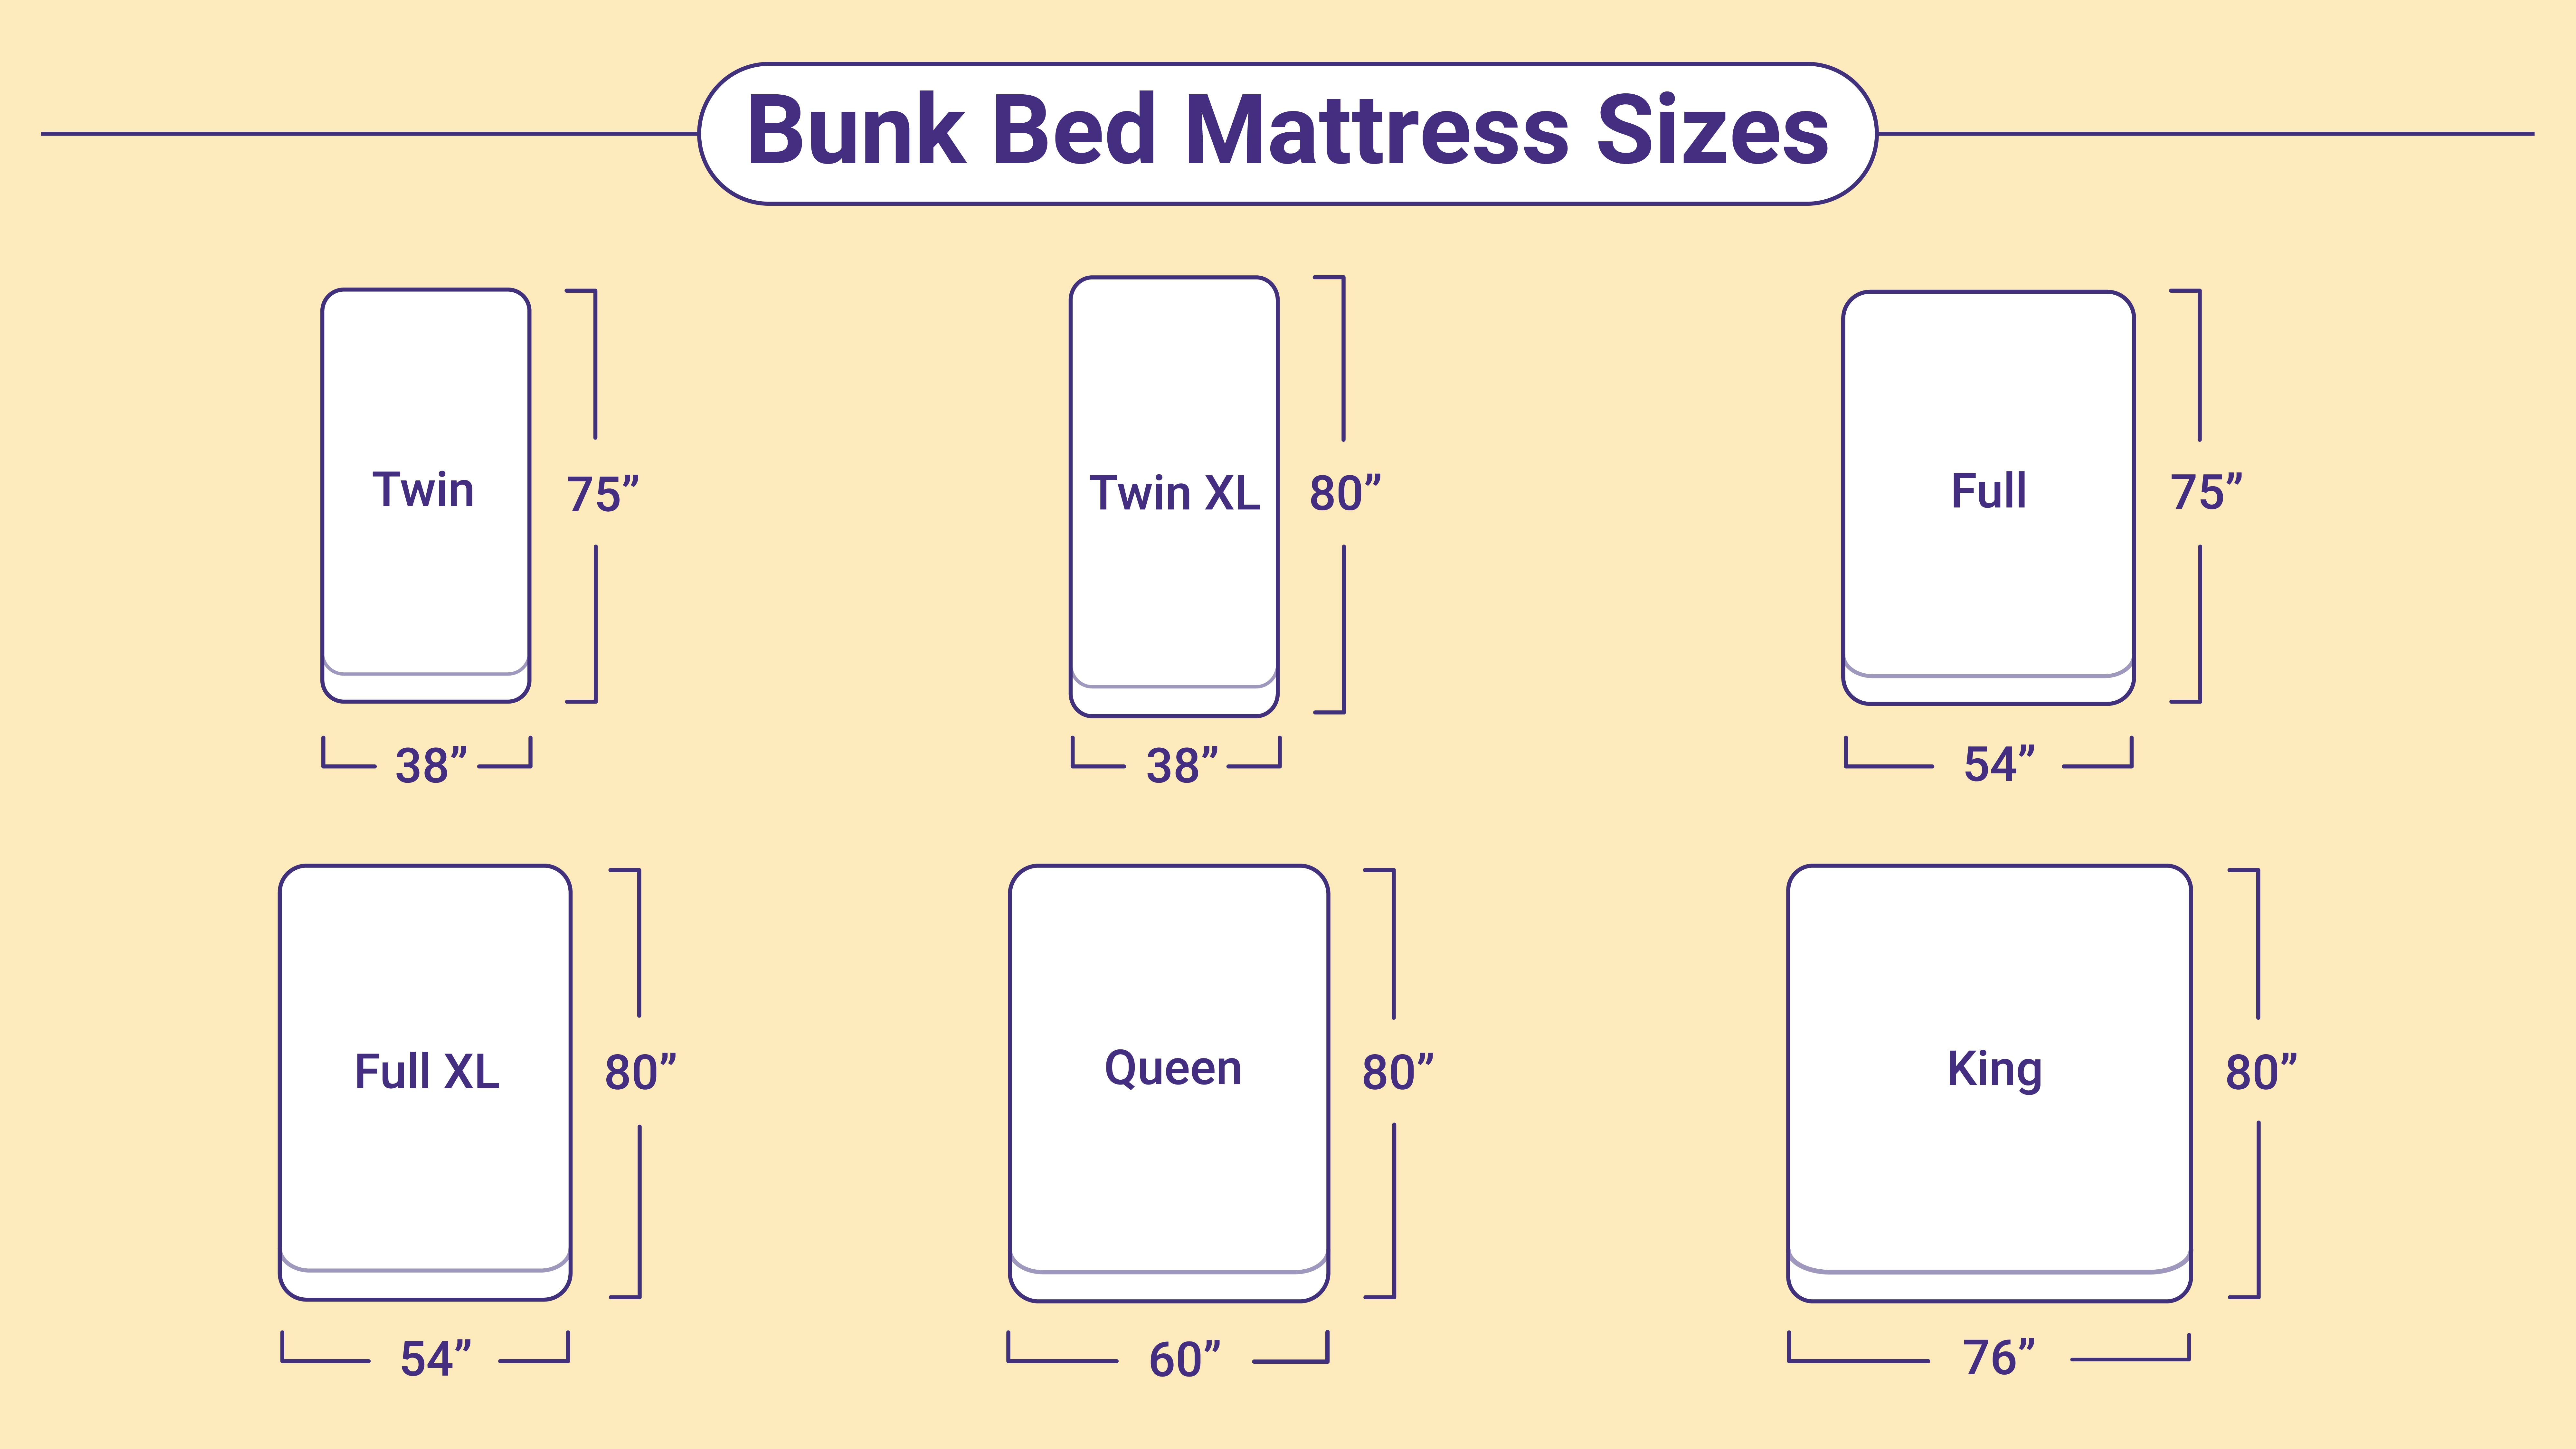 Bunk Bed Mattress Sizes And Dimensions, Bunk Bed Dimensions Between Beds